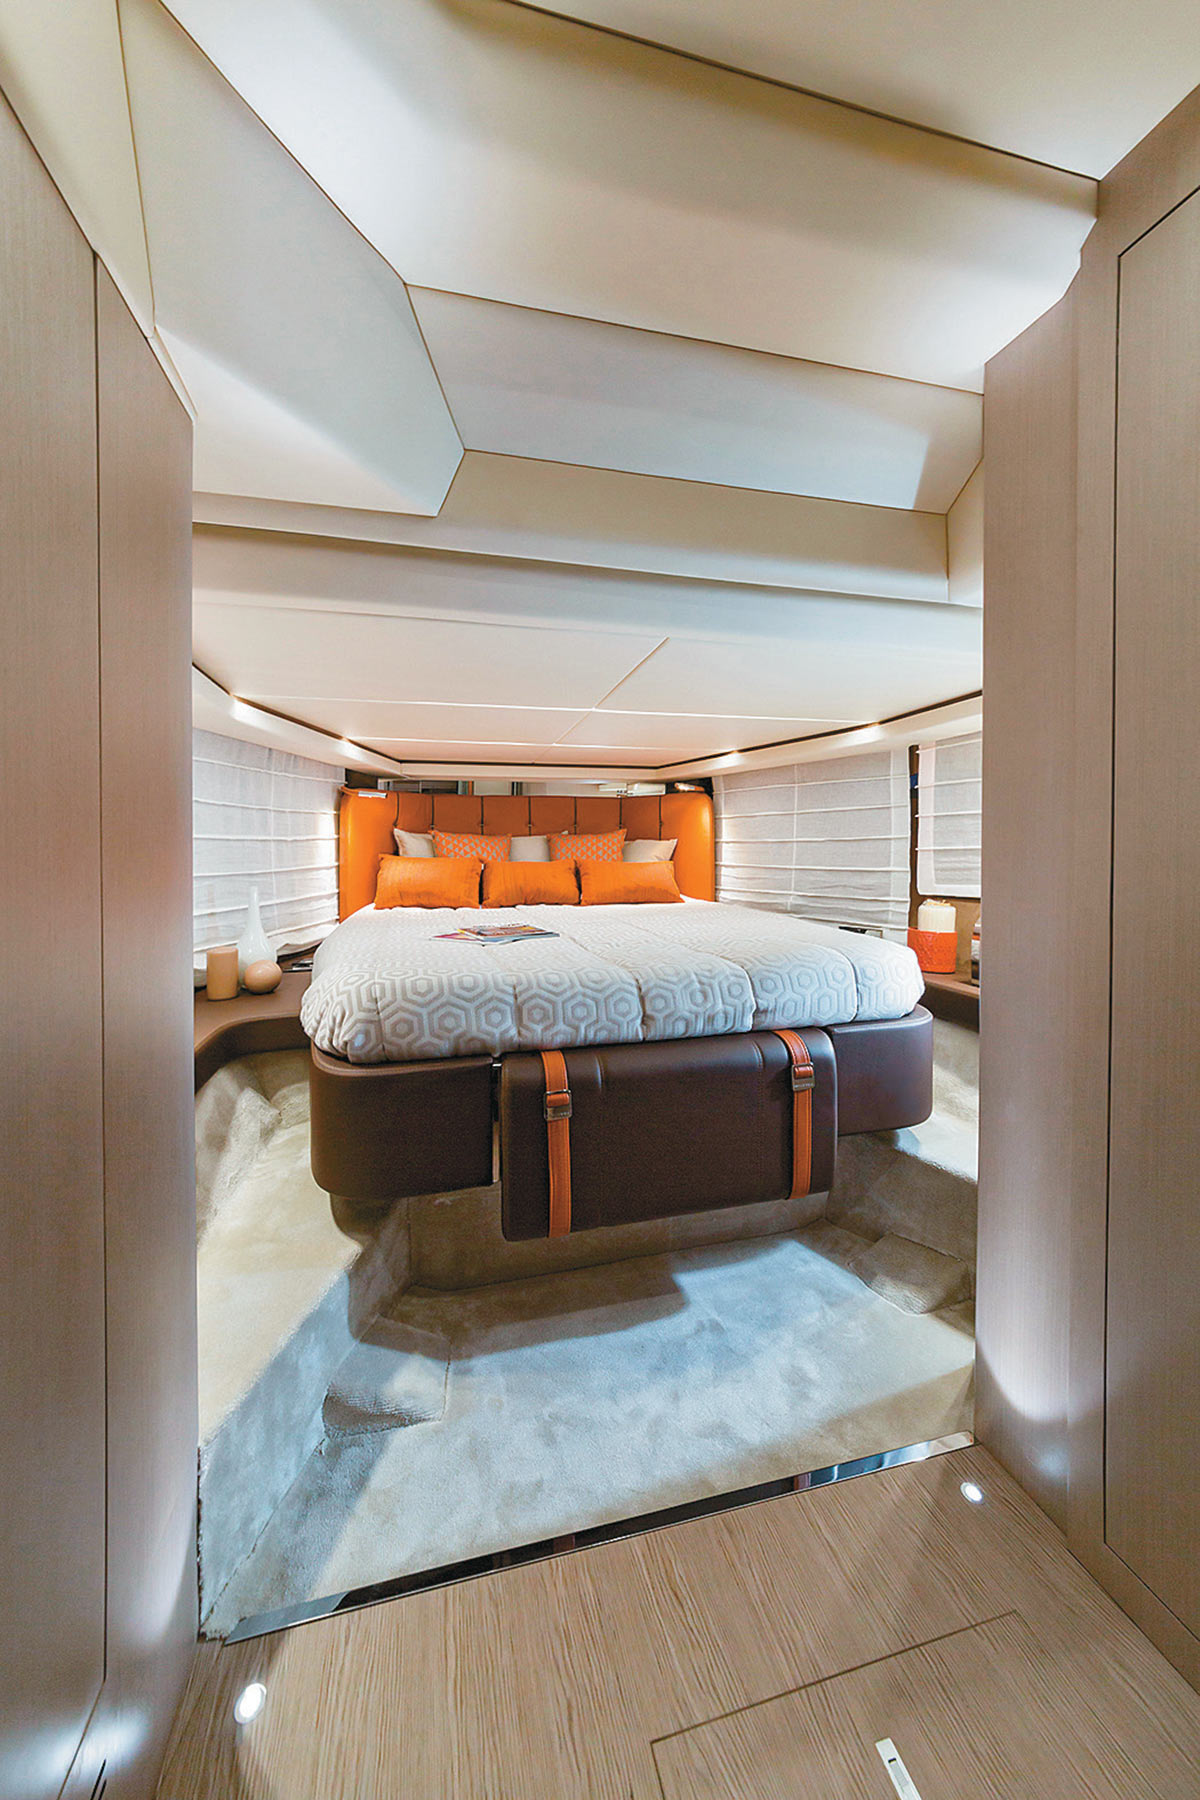 interior view of bedroom inside the boat